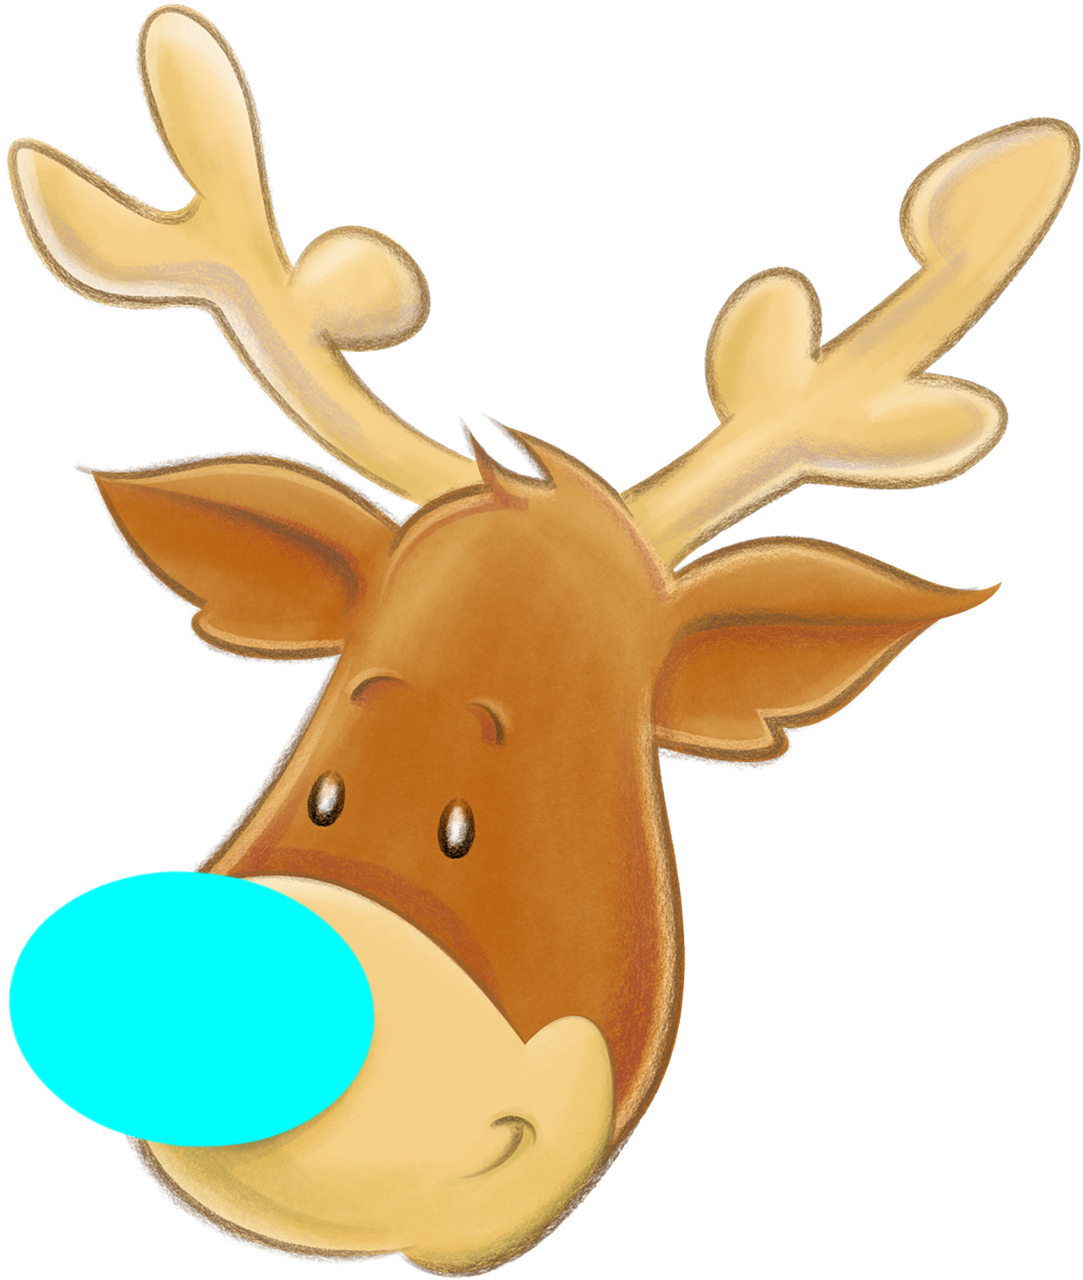 The Original Blitzin - Rudolph The Red Nosed Reindeer (1083x1280)